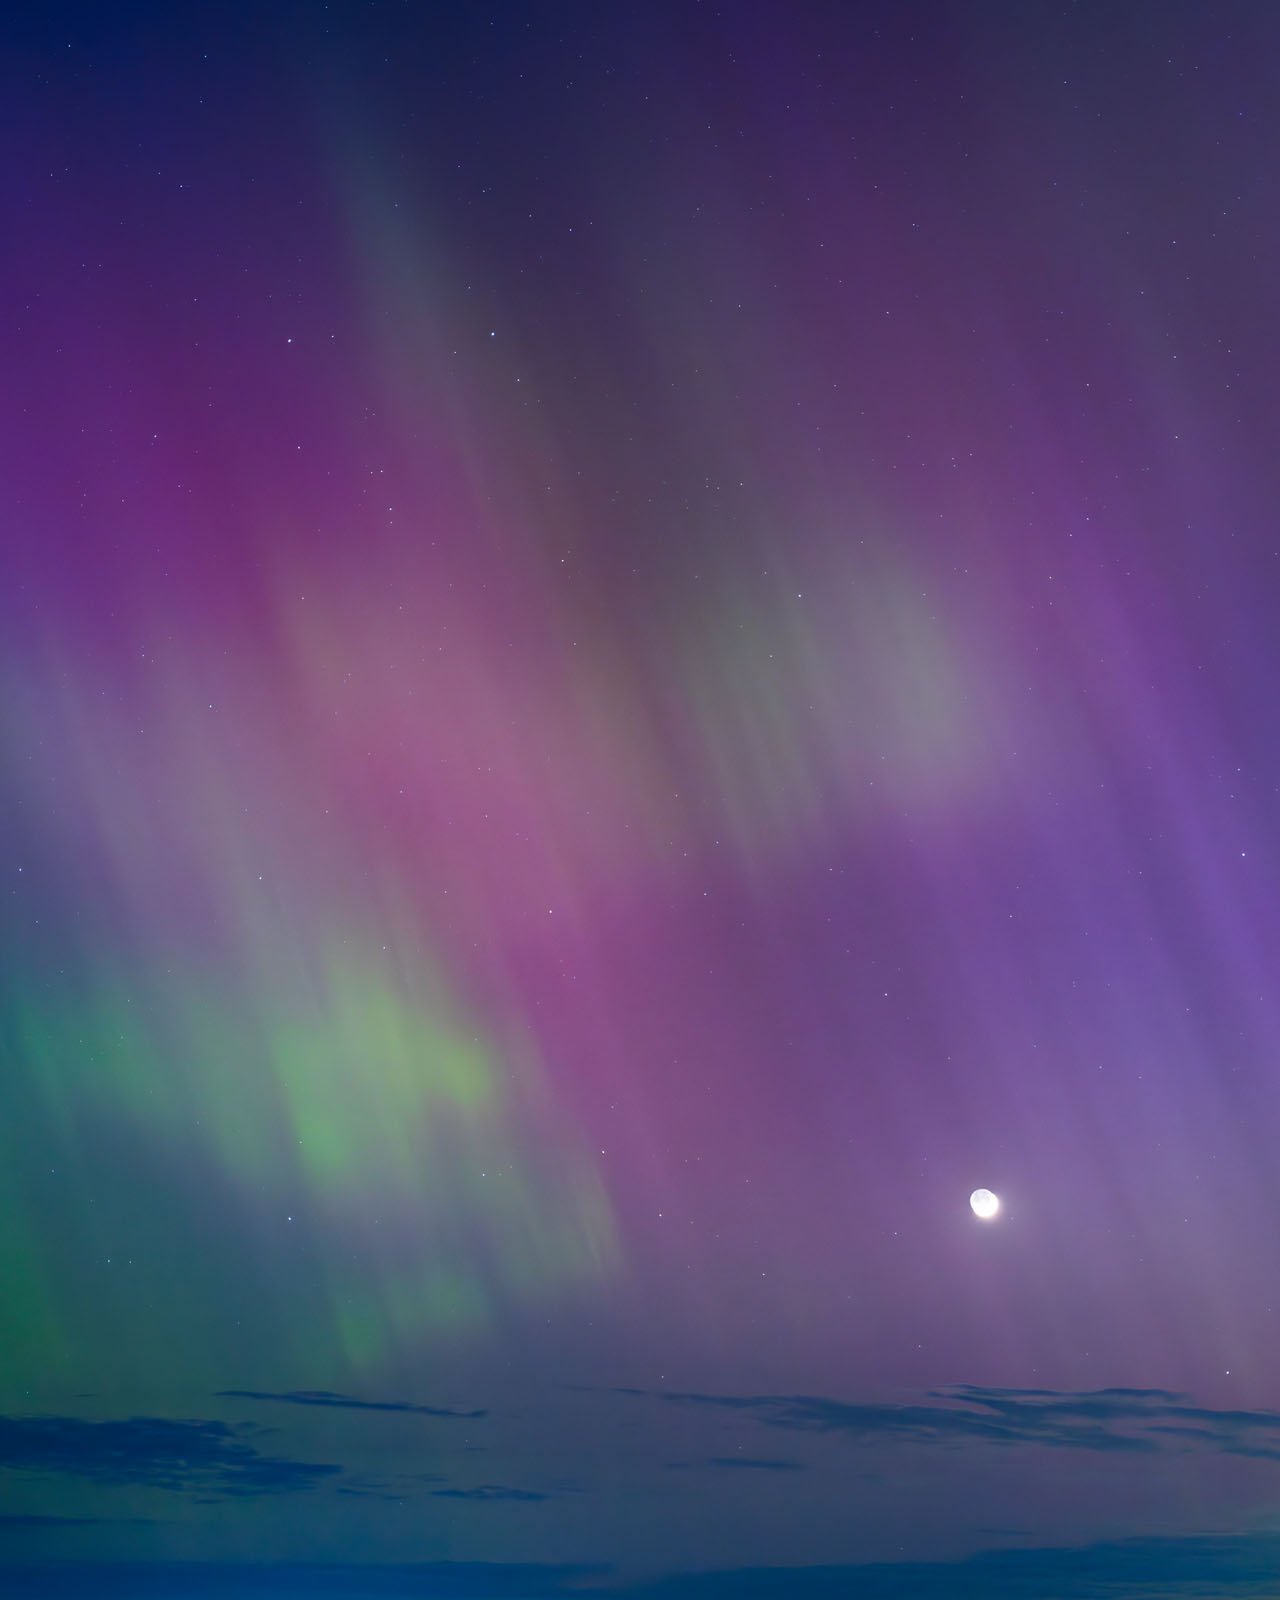 Vibrant aurora borealis displays vivid pink and green streaks across a twilight sky, with a bright moon visible near the horizon.